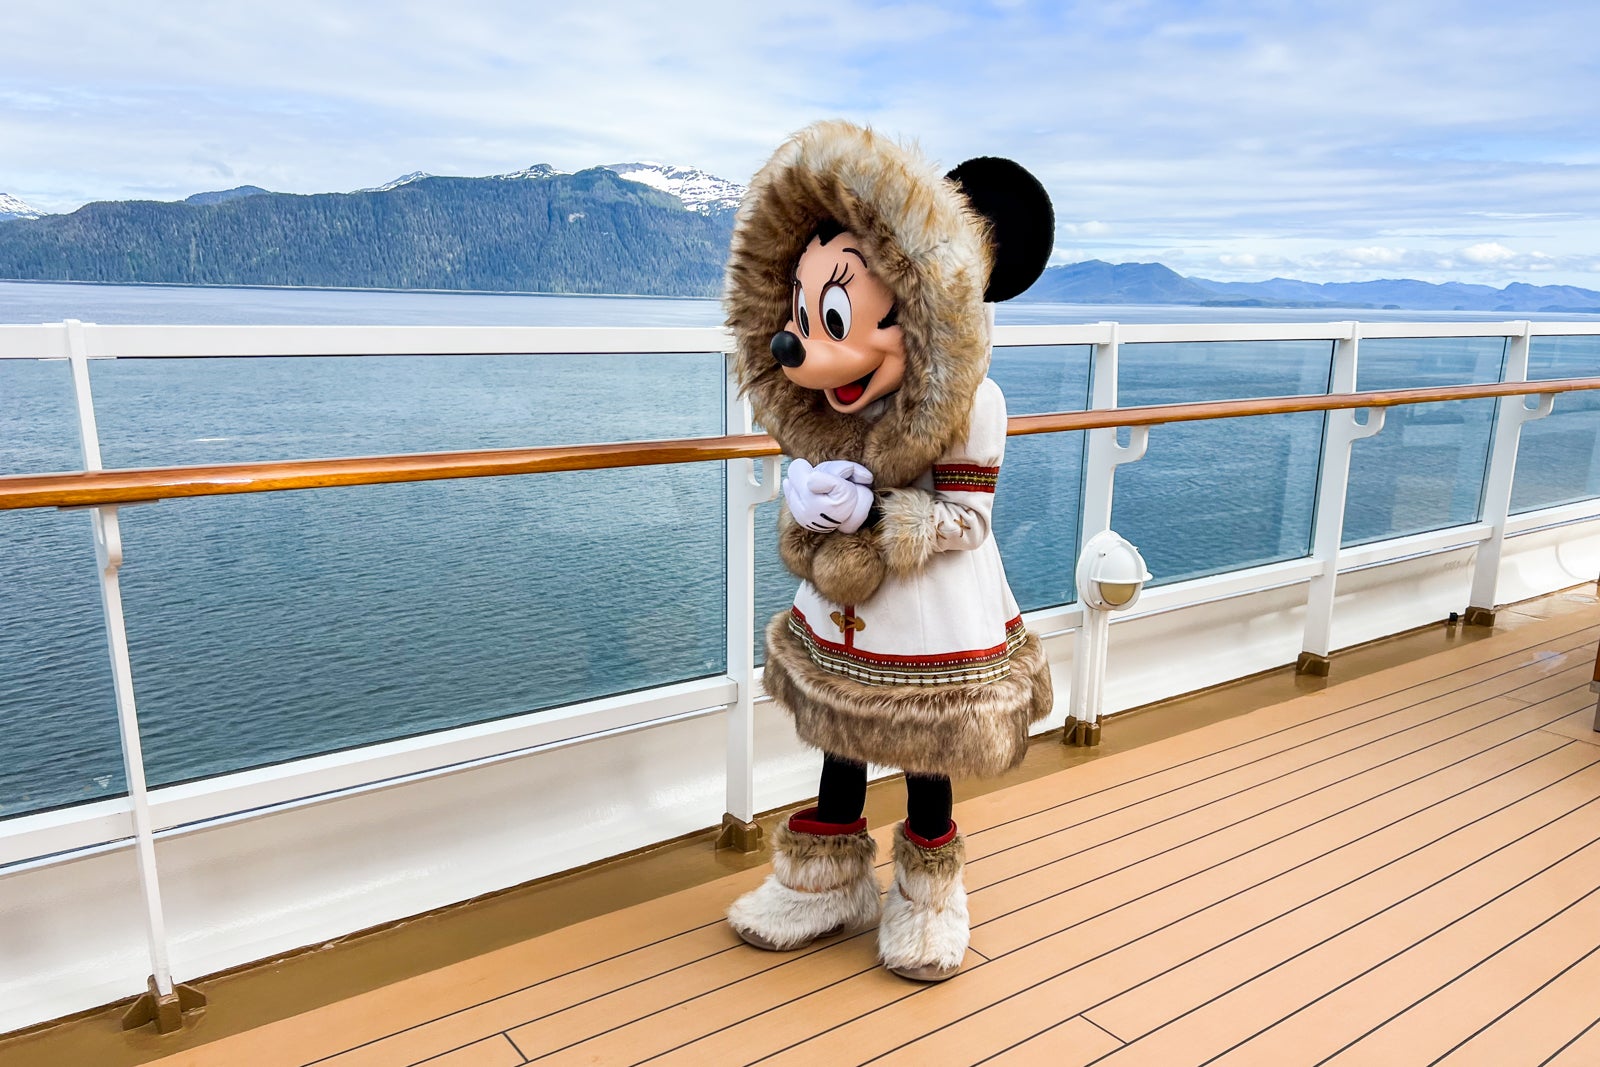 Minnie in her Alaska outfit on deck